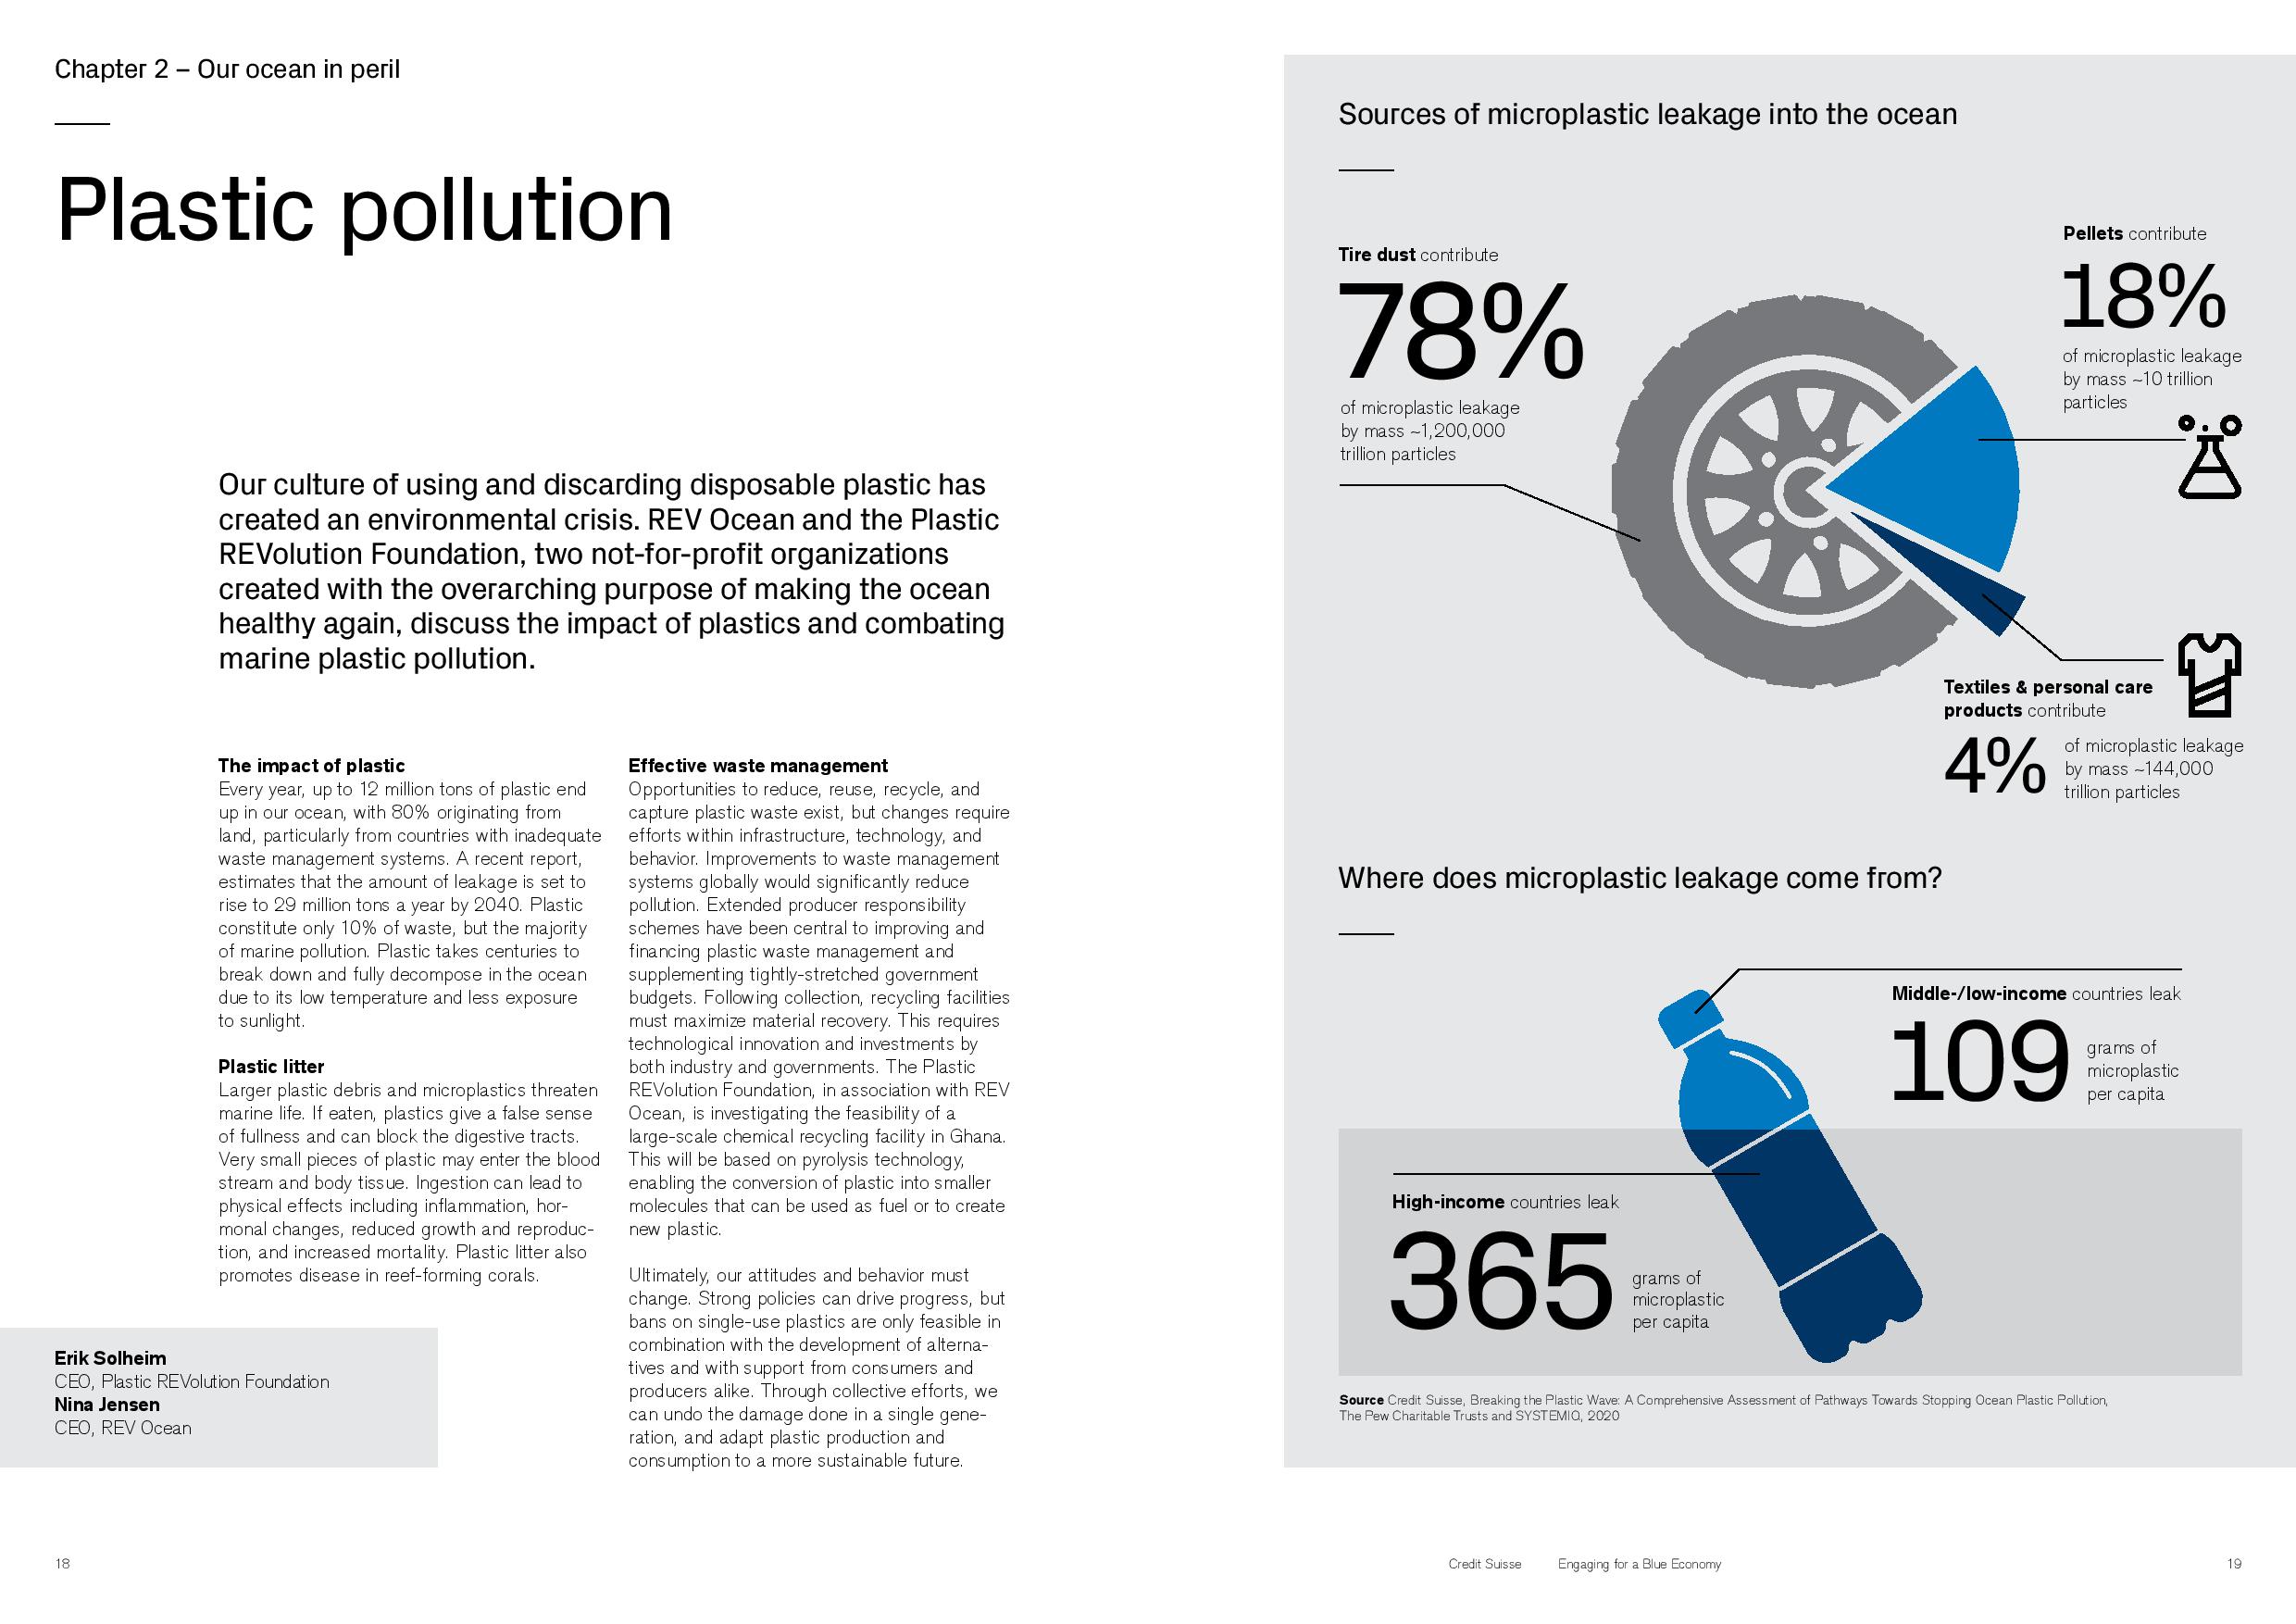 The Plastic REVolution Foundation and REV Ocean contribute to Credit Suisse topical report on shareholder engagement for ocean sustainability